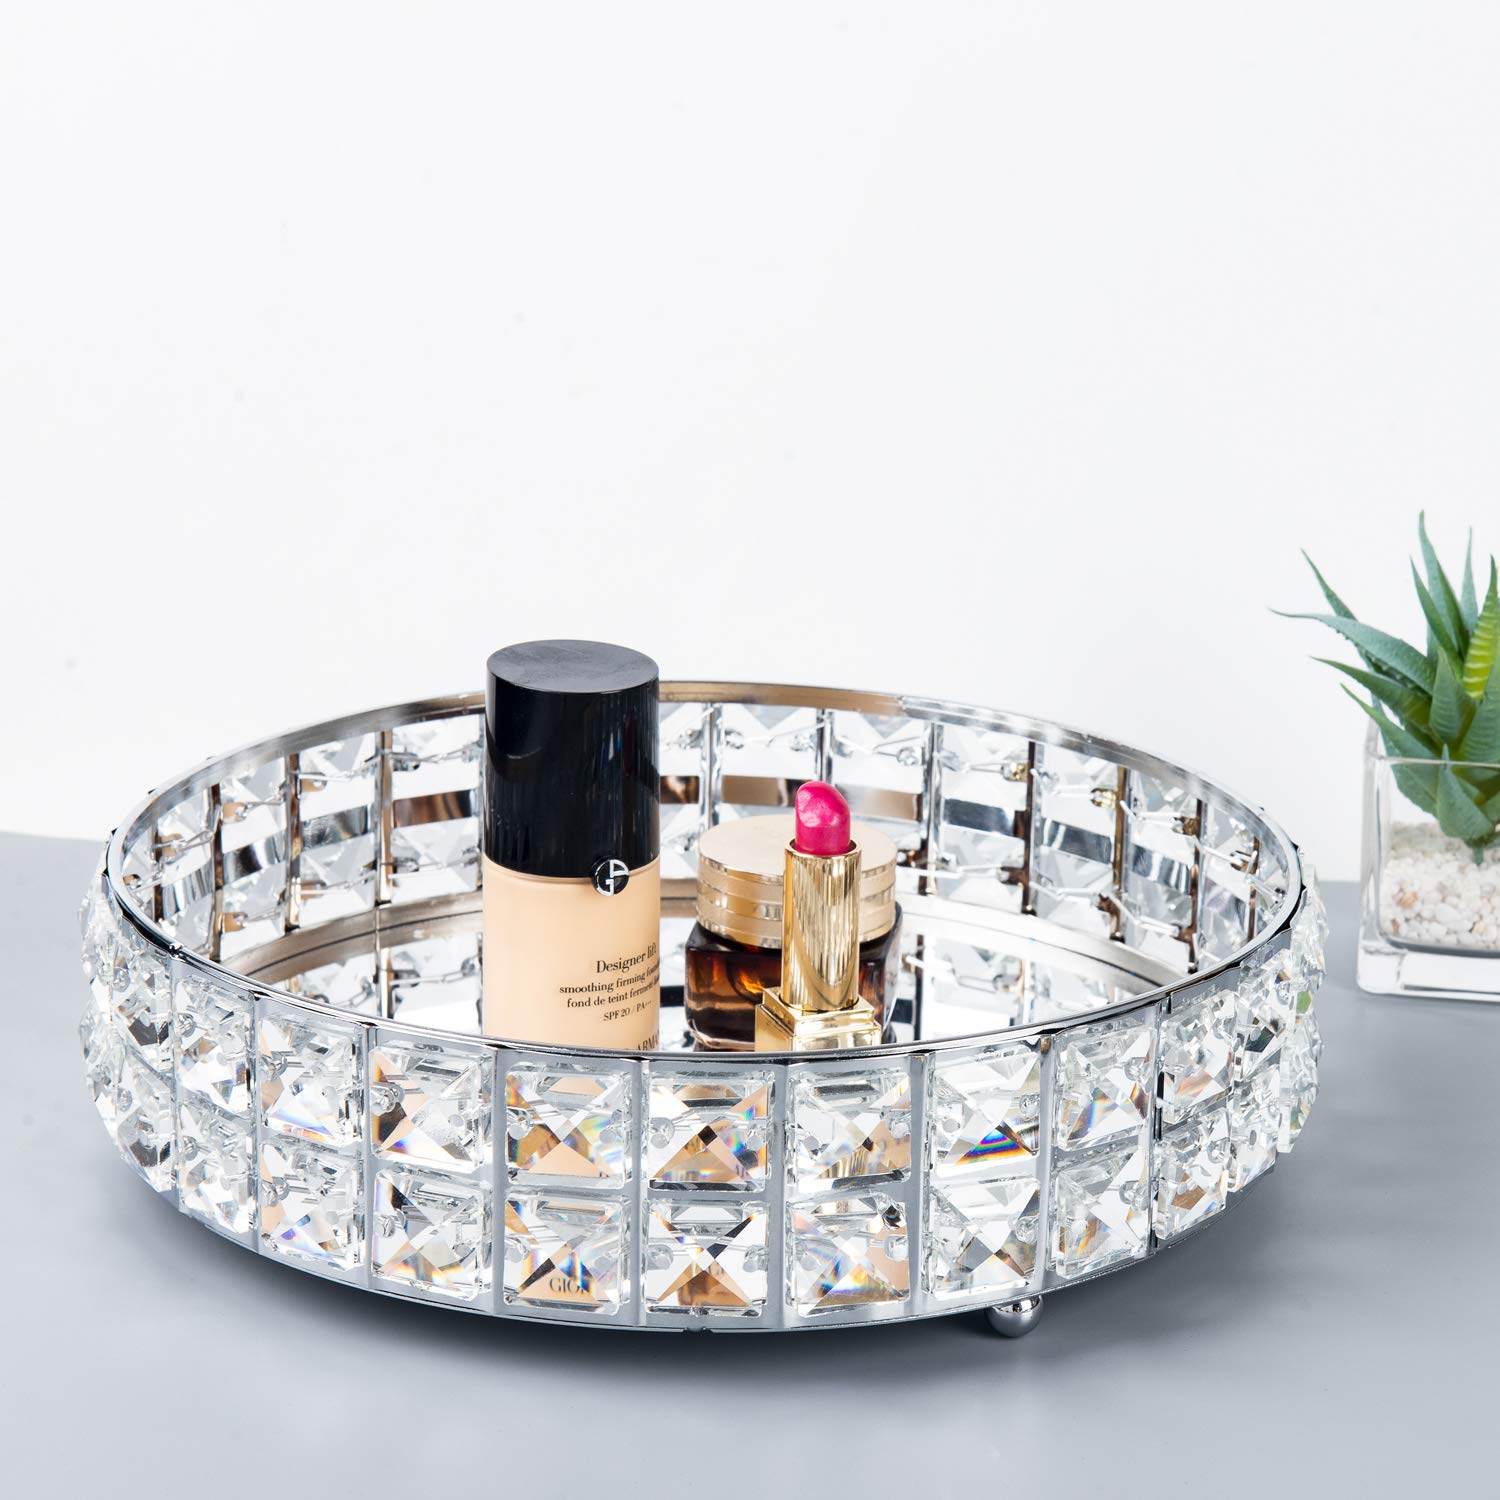 Feyarl Crystal Mirrored Tray Anti-Scratch Glass Mirror Surface Vanity Makeup Tray Cosmetic Perfume Tray Round Decorative Tray for Dresser bathroom Home Decor (Silver)